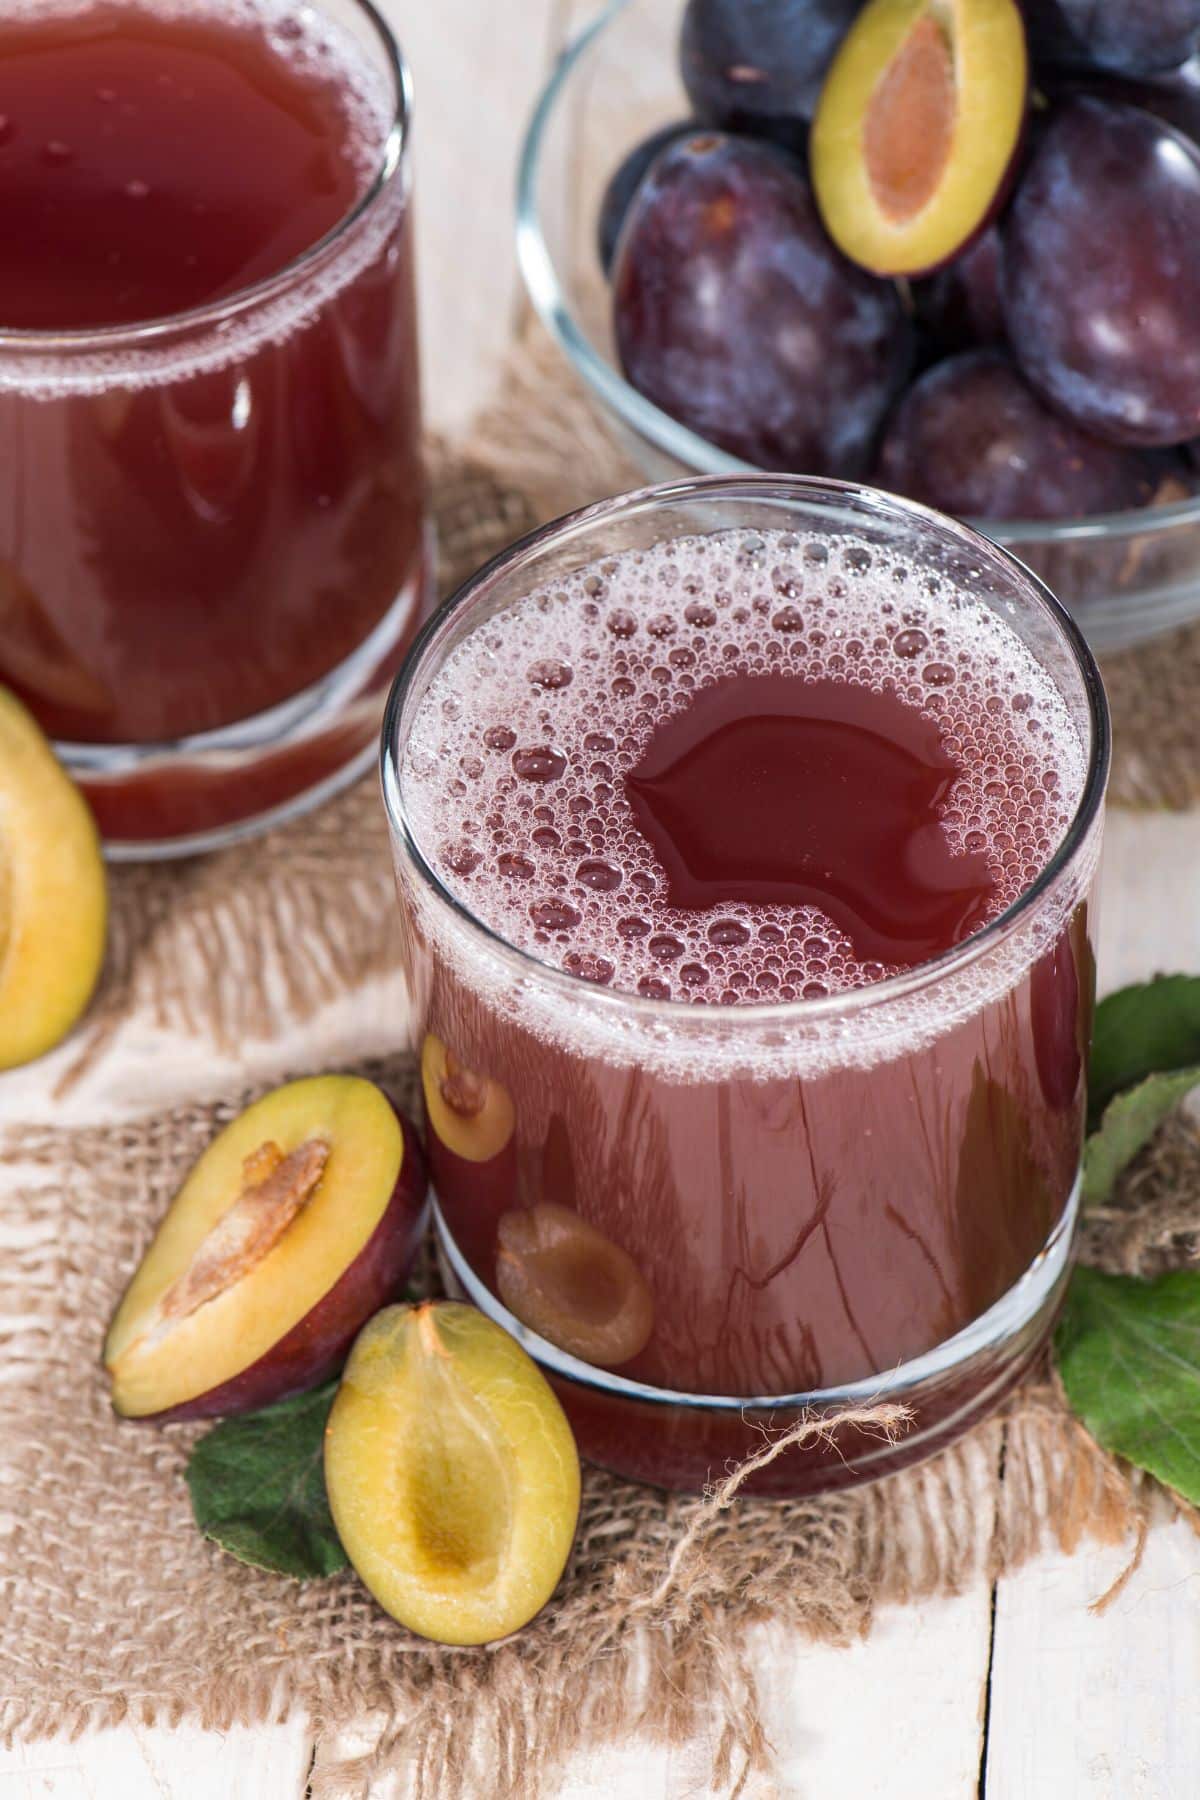 https://www.cleaneatingkitchen.com/wp-content/uploads/2023/01/two-glasses-plum-juice-on-table.jpg